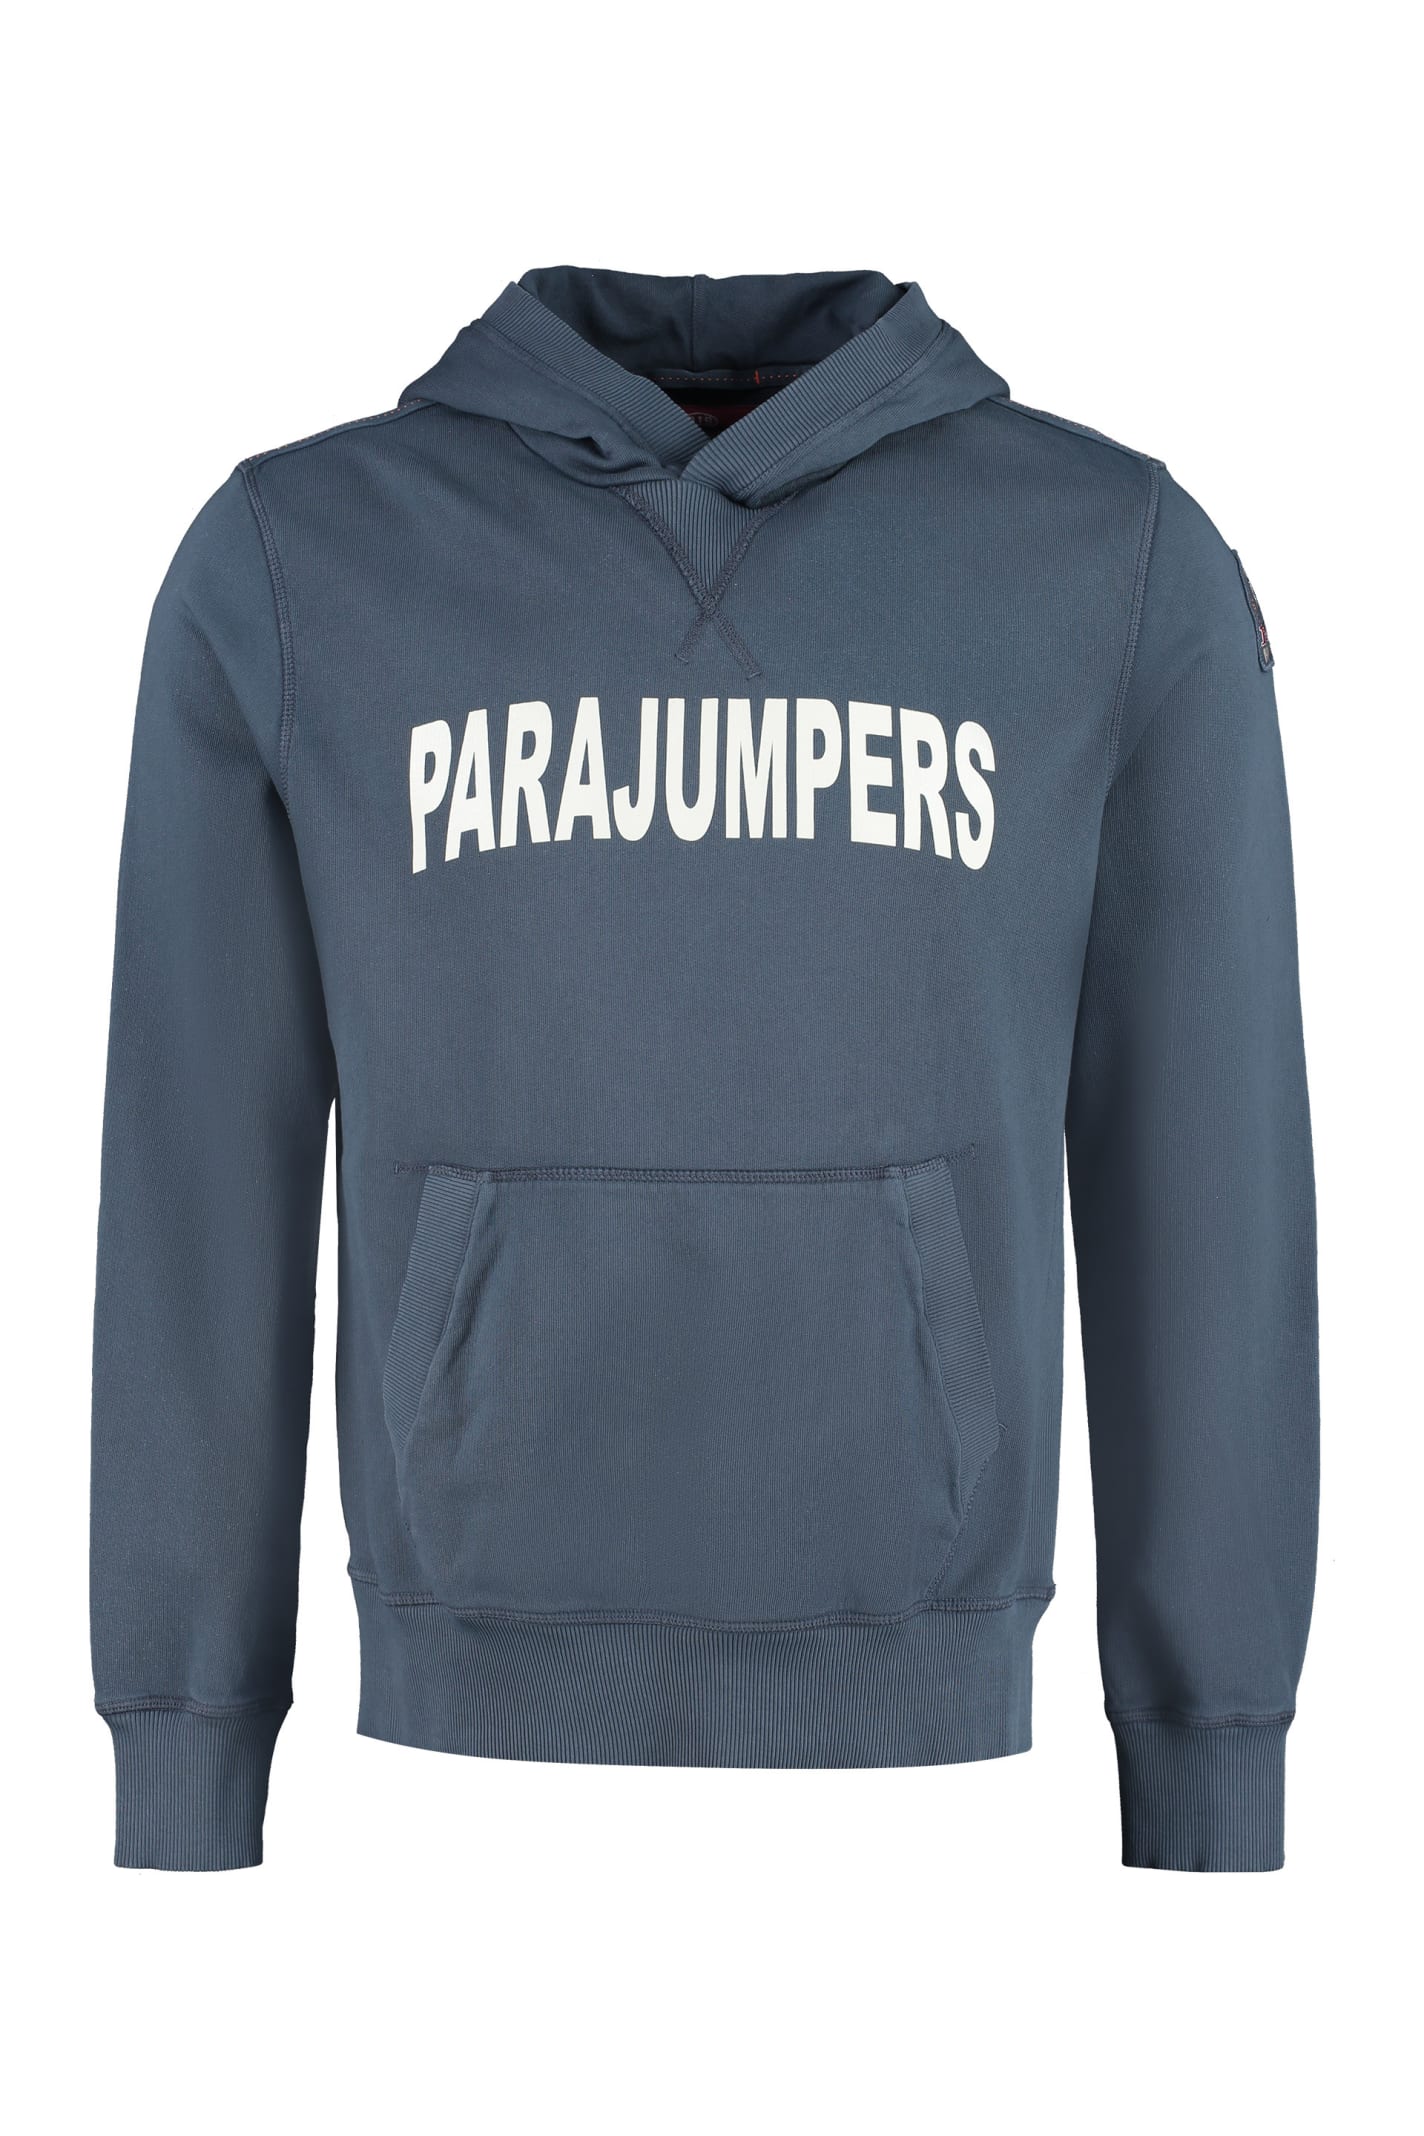 PARAJUMPERS CHESS HOODED SWEATSHIRT,PMFLECF28P30 747